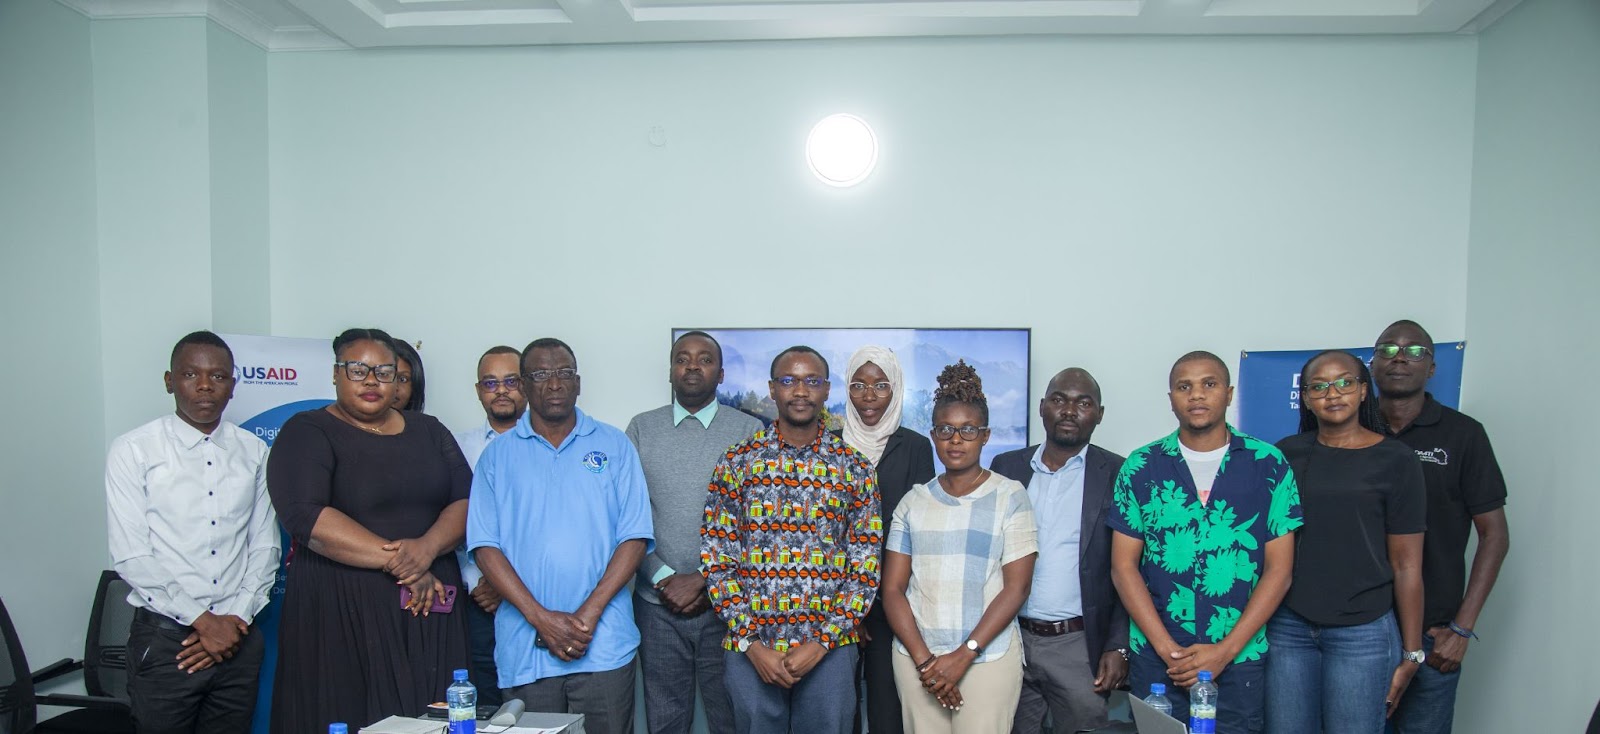 DA4TI hosts a Digital Rights Advocacy Engagement Workshop with Key Government Actors based on the Ranking of Digital Rights Research and Digital Identity Research Reports in Dodoma.